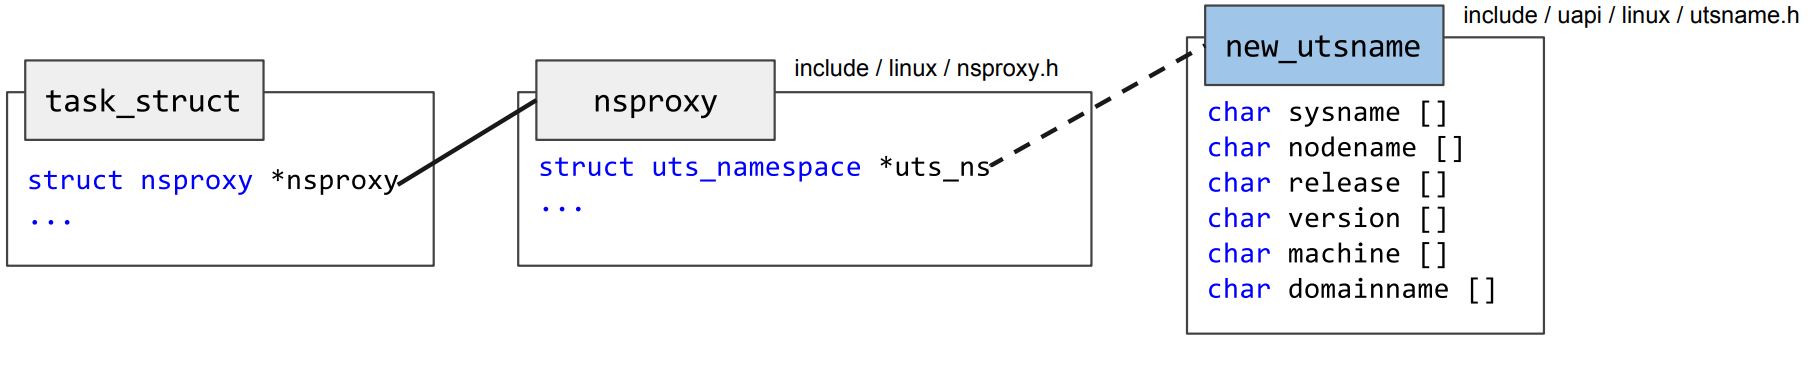 Namespaces UTS Structures